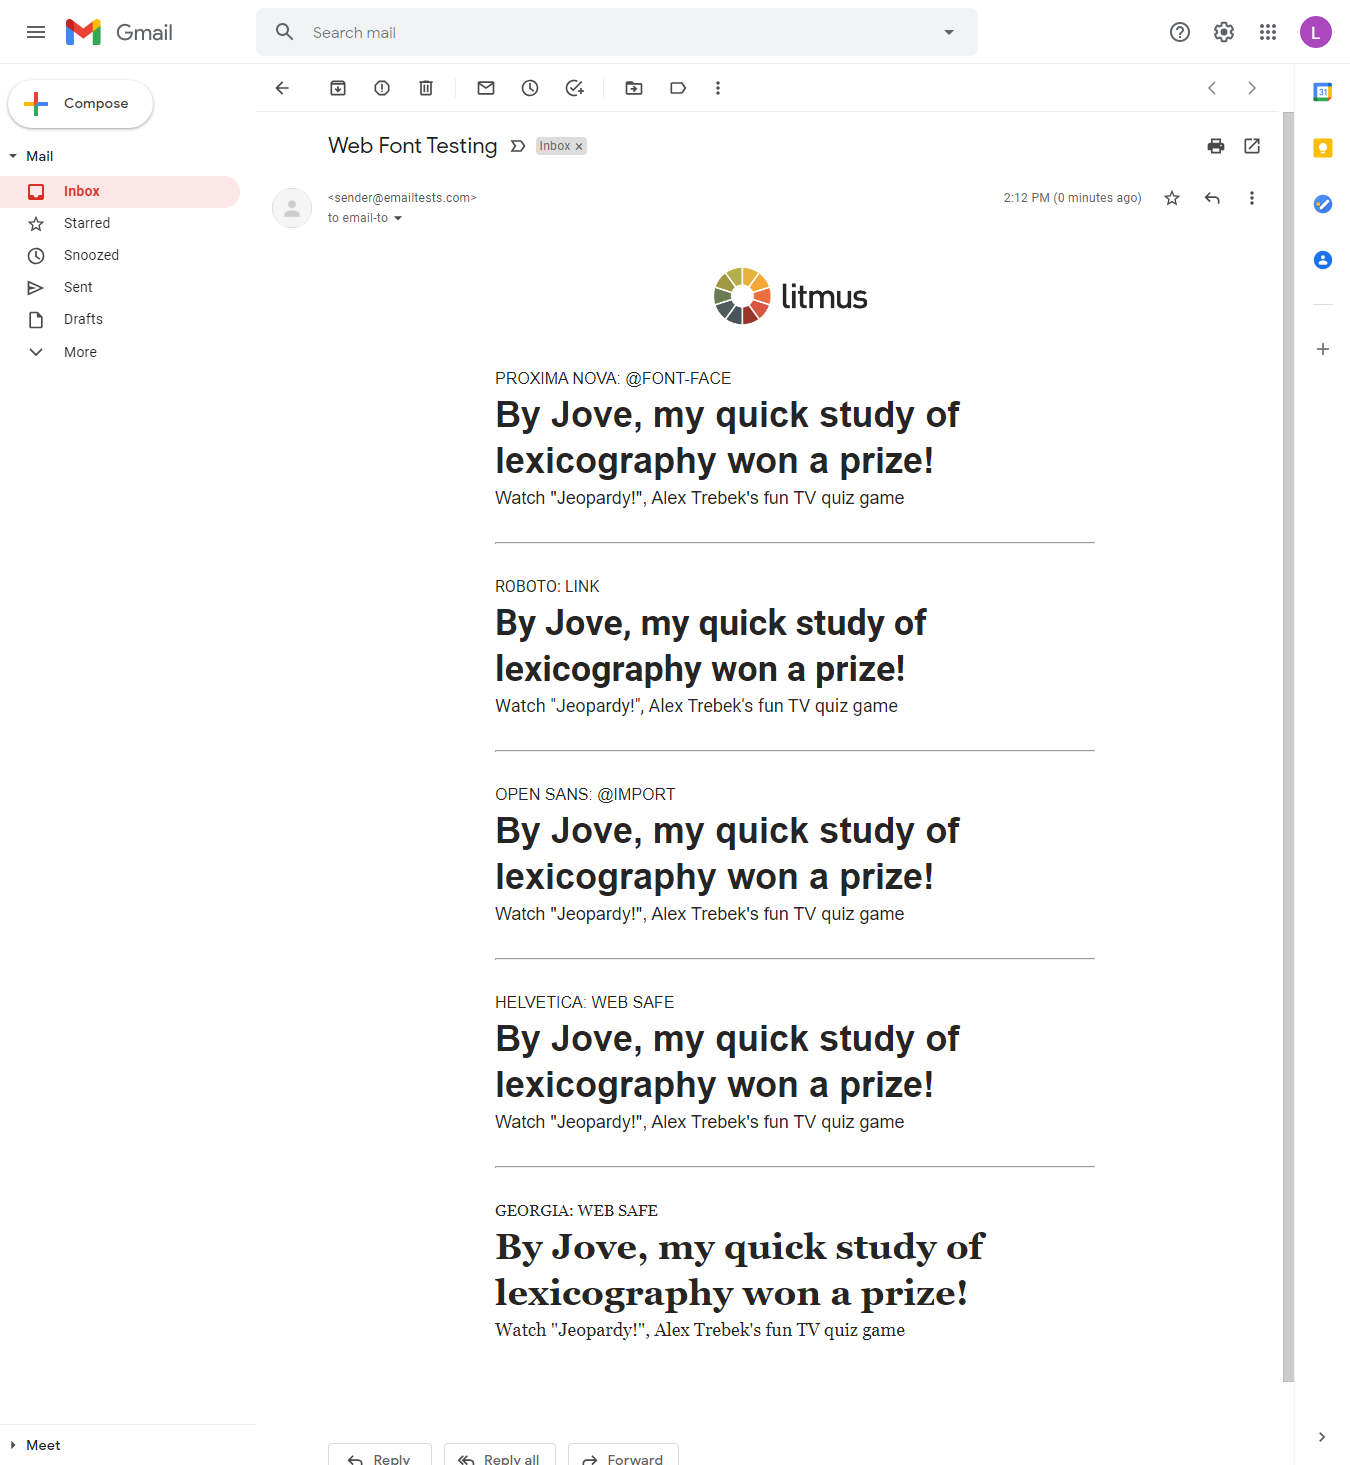 testing web font embed methods in gmail